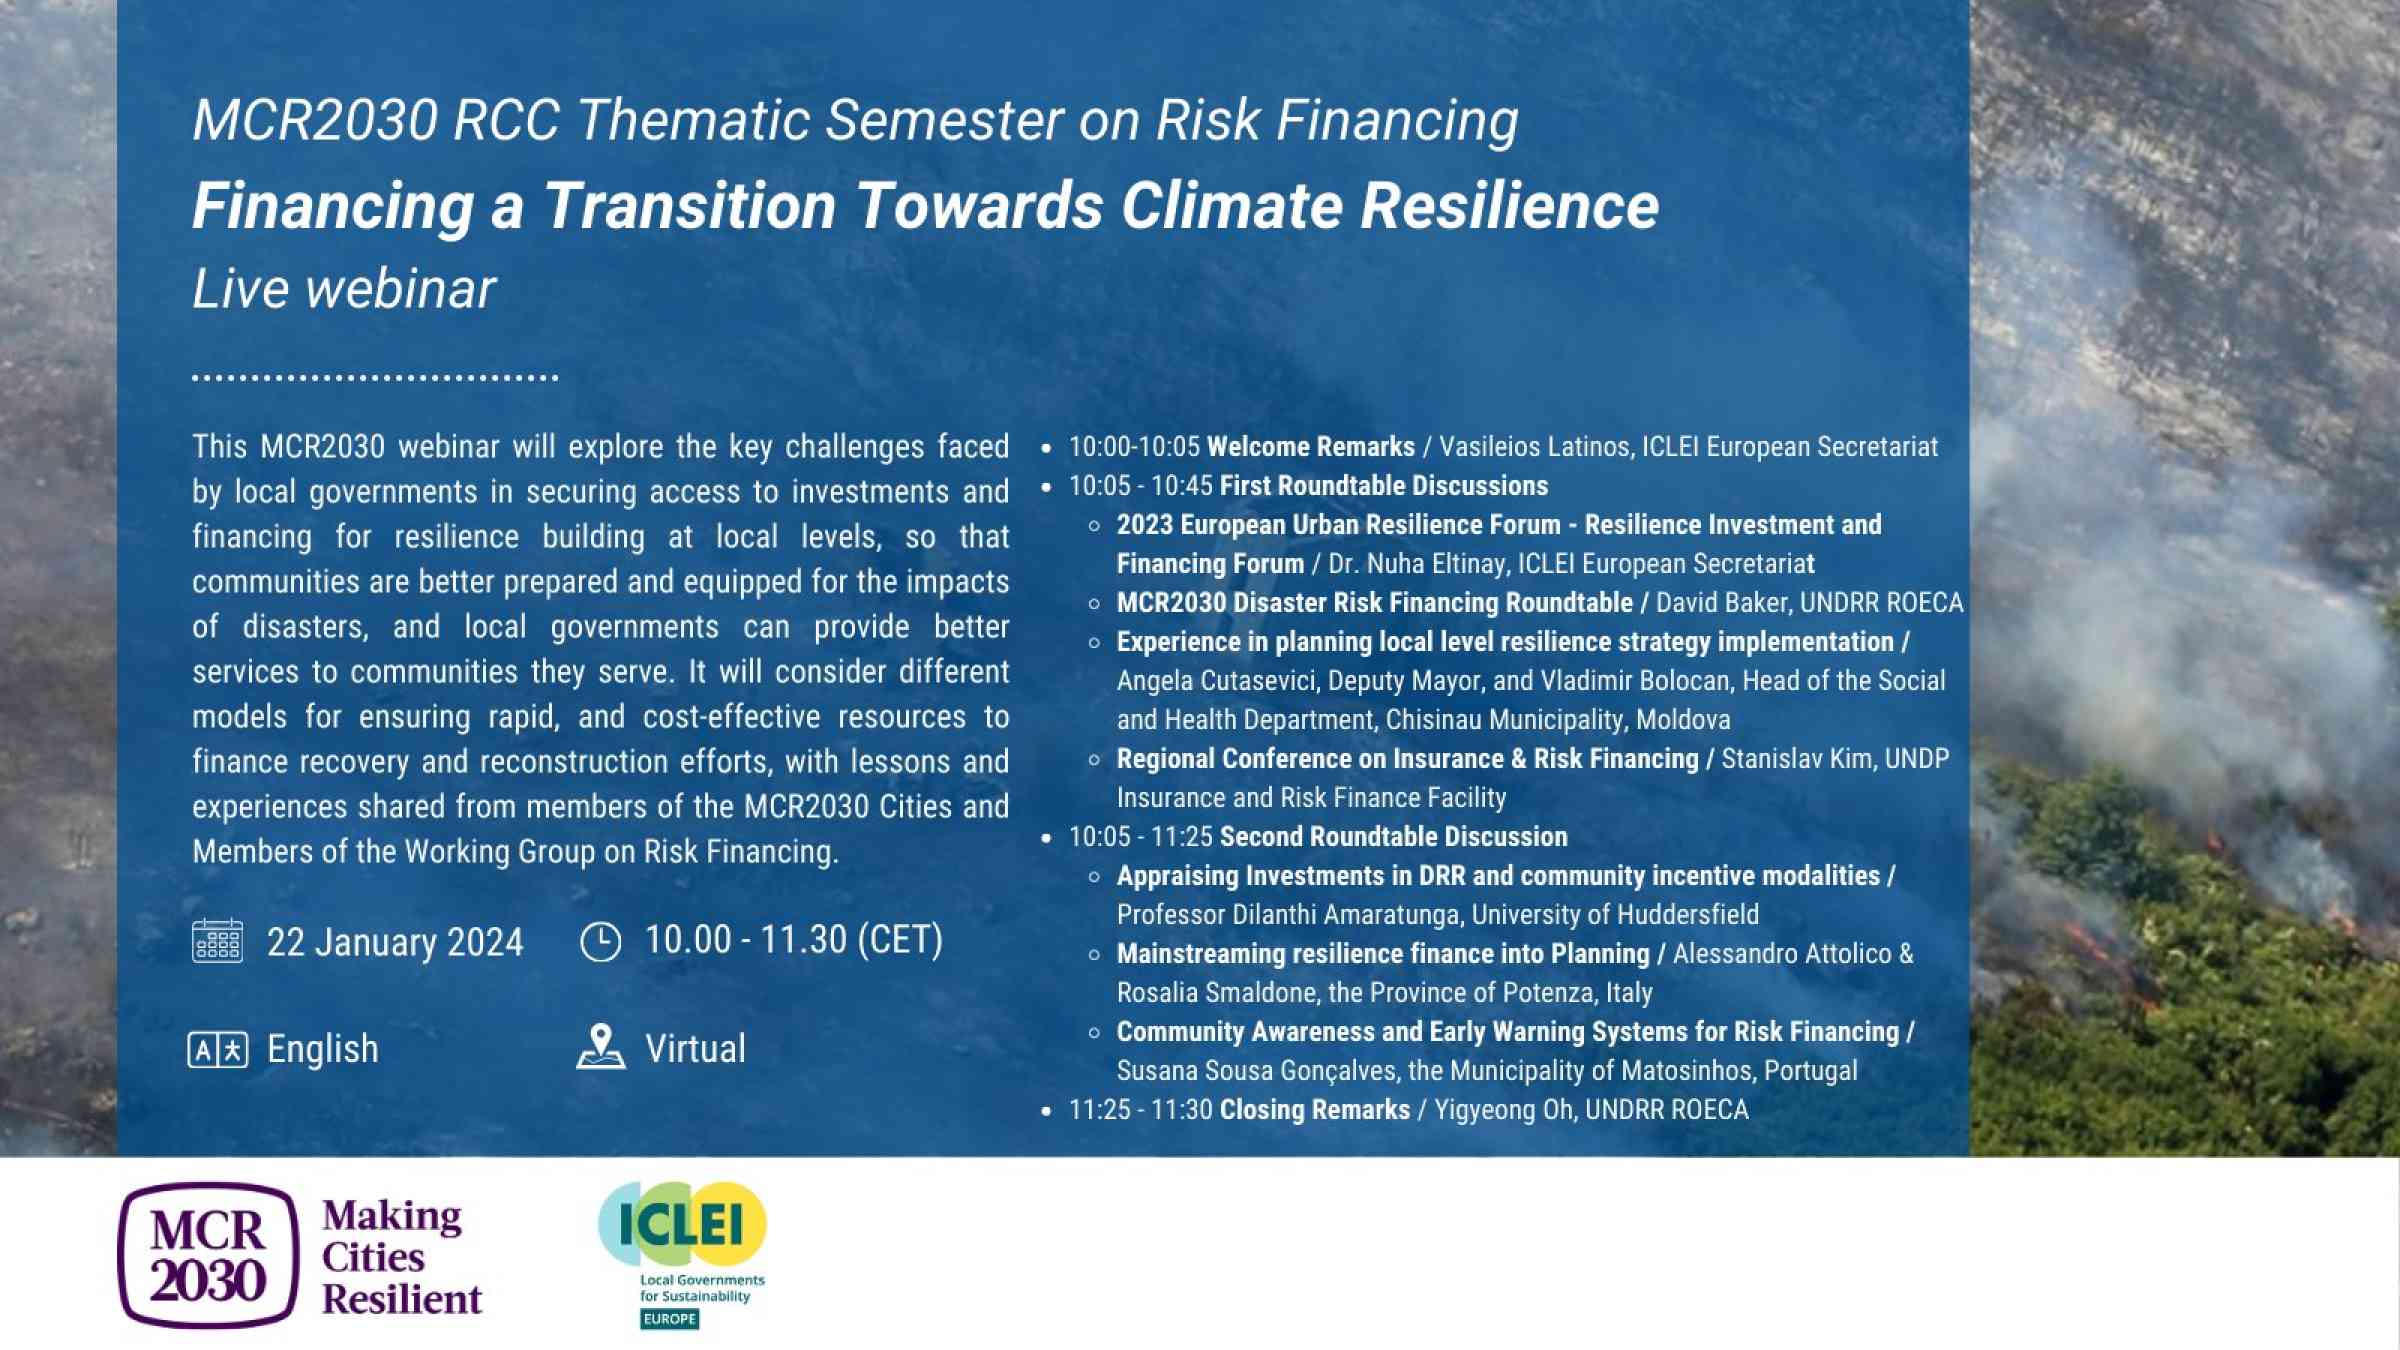 MCR2030 RCC thematic semester on Risk Financing - Financing a Transition Towards Climate Resilience